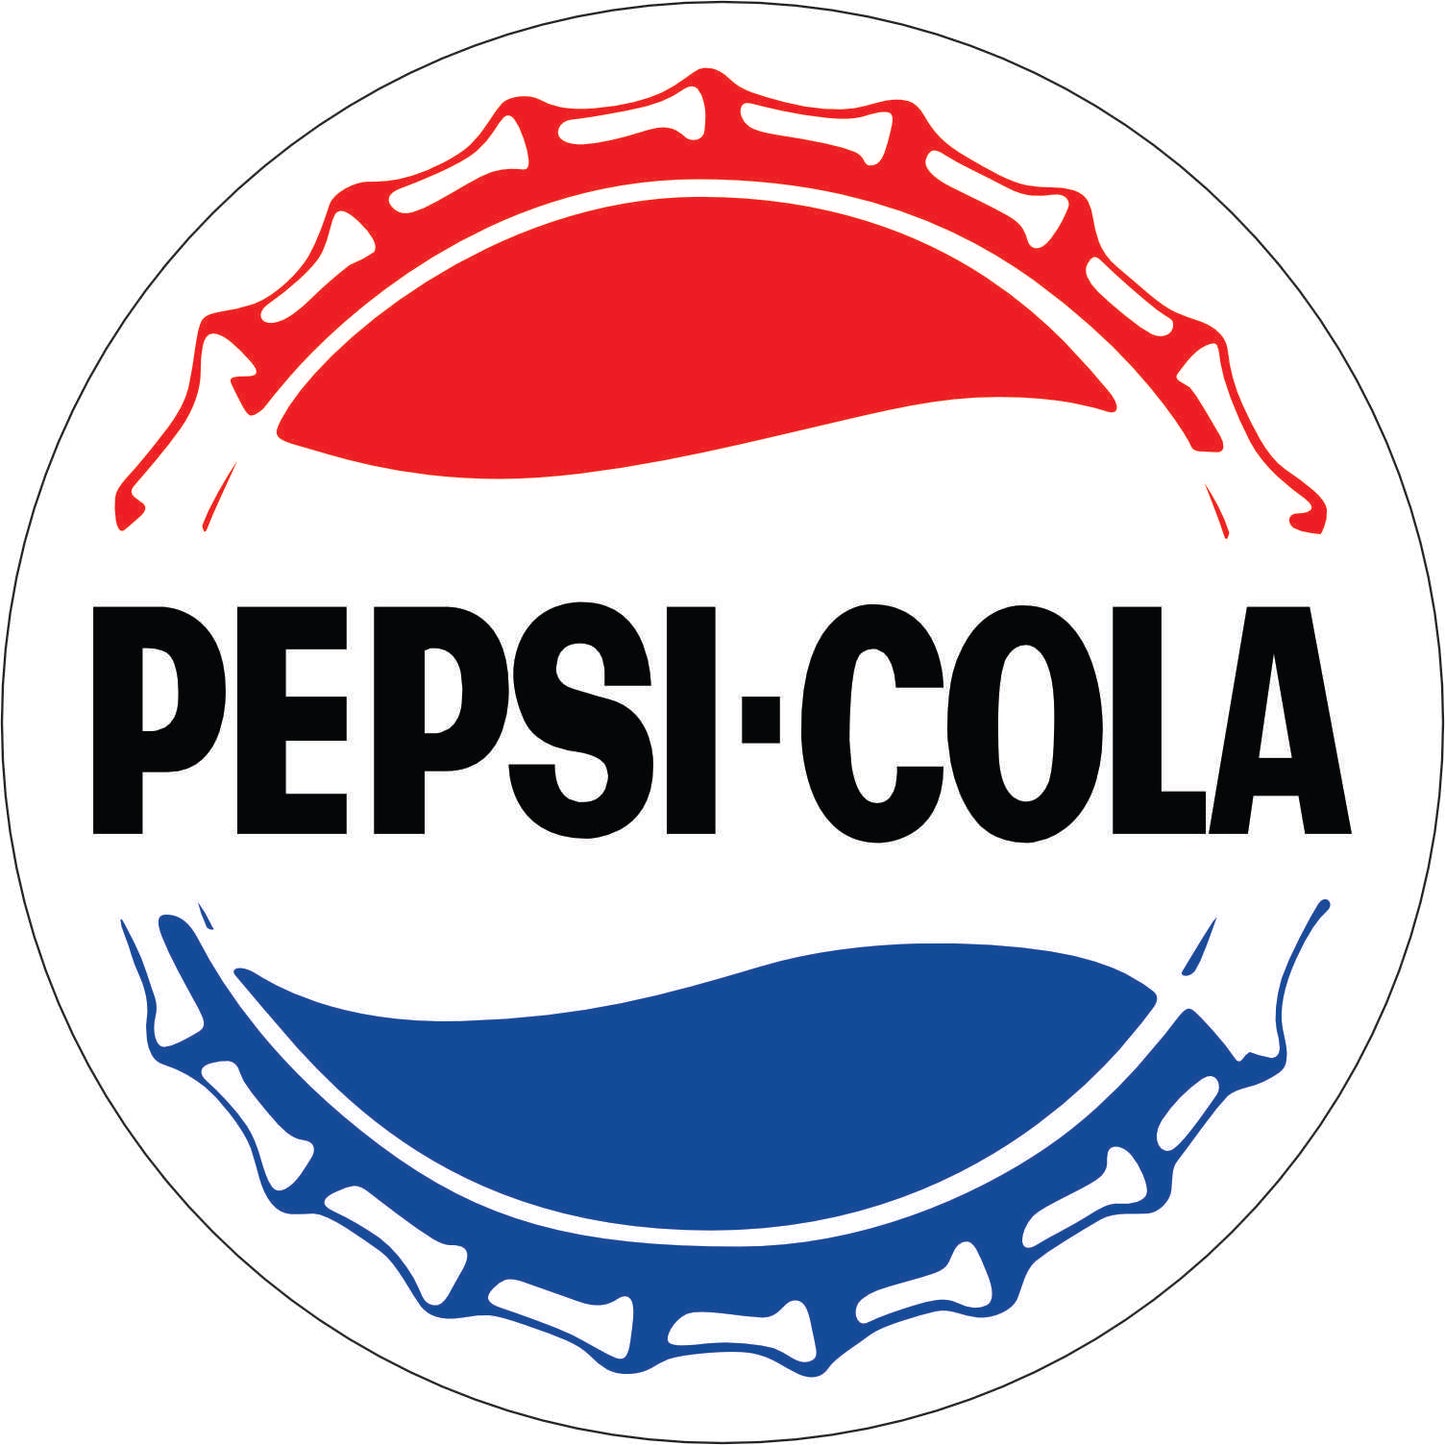 144-Wall clock with neon - Pepsi